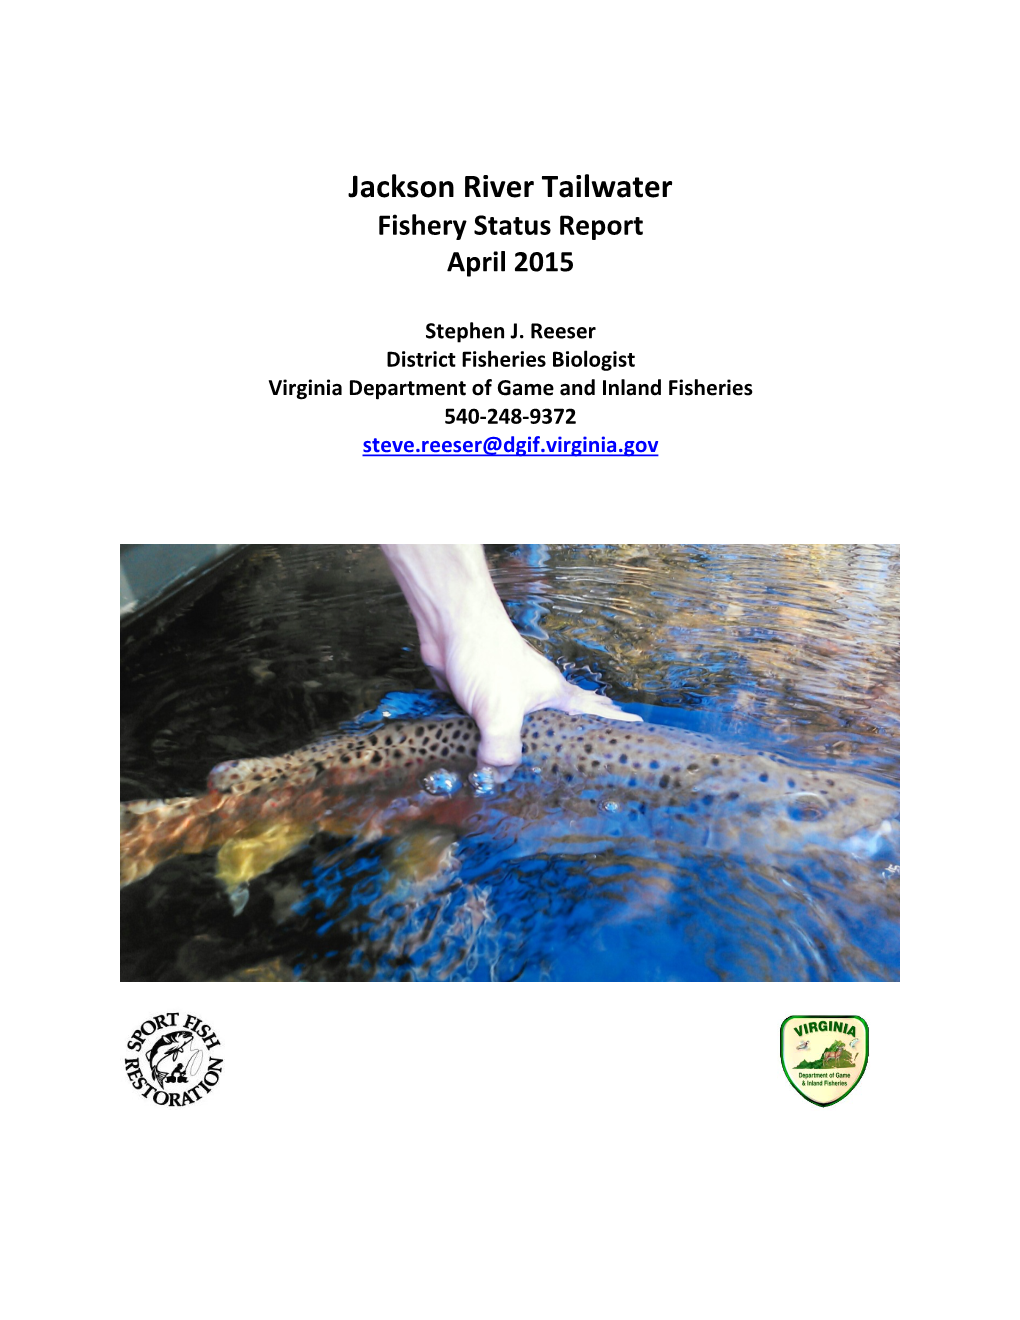 Jackson River Tailwater Report 2015